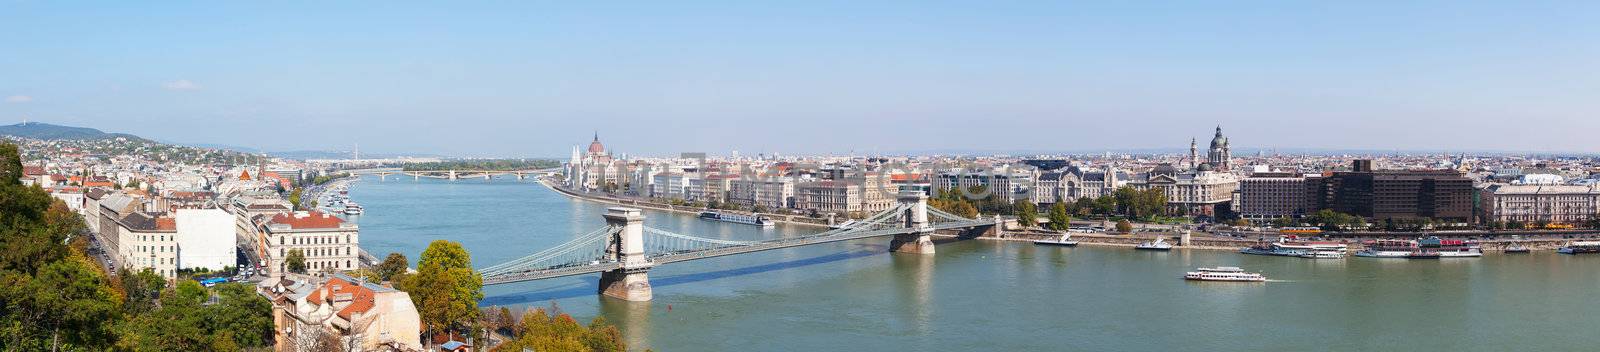 Panoramic overview of Budapest, Hungary by AndreyKr